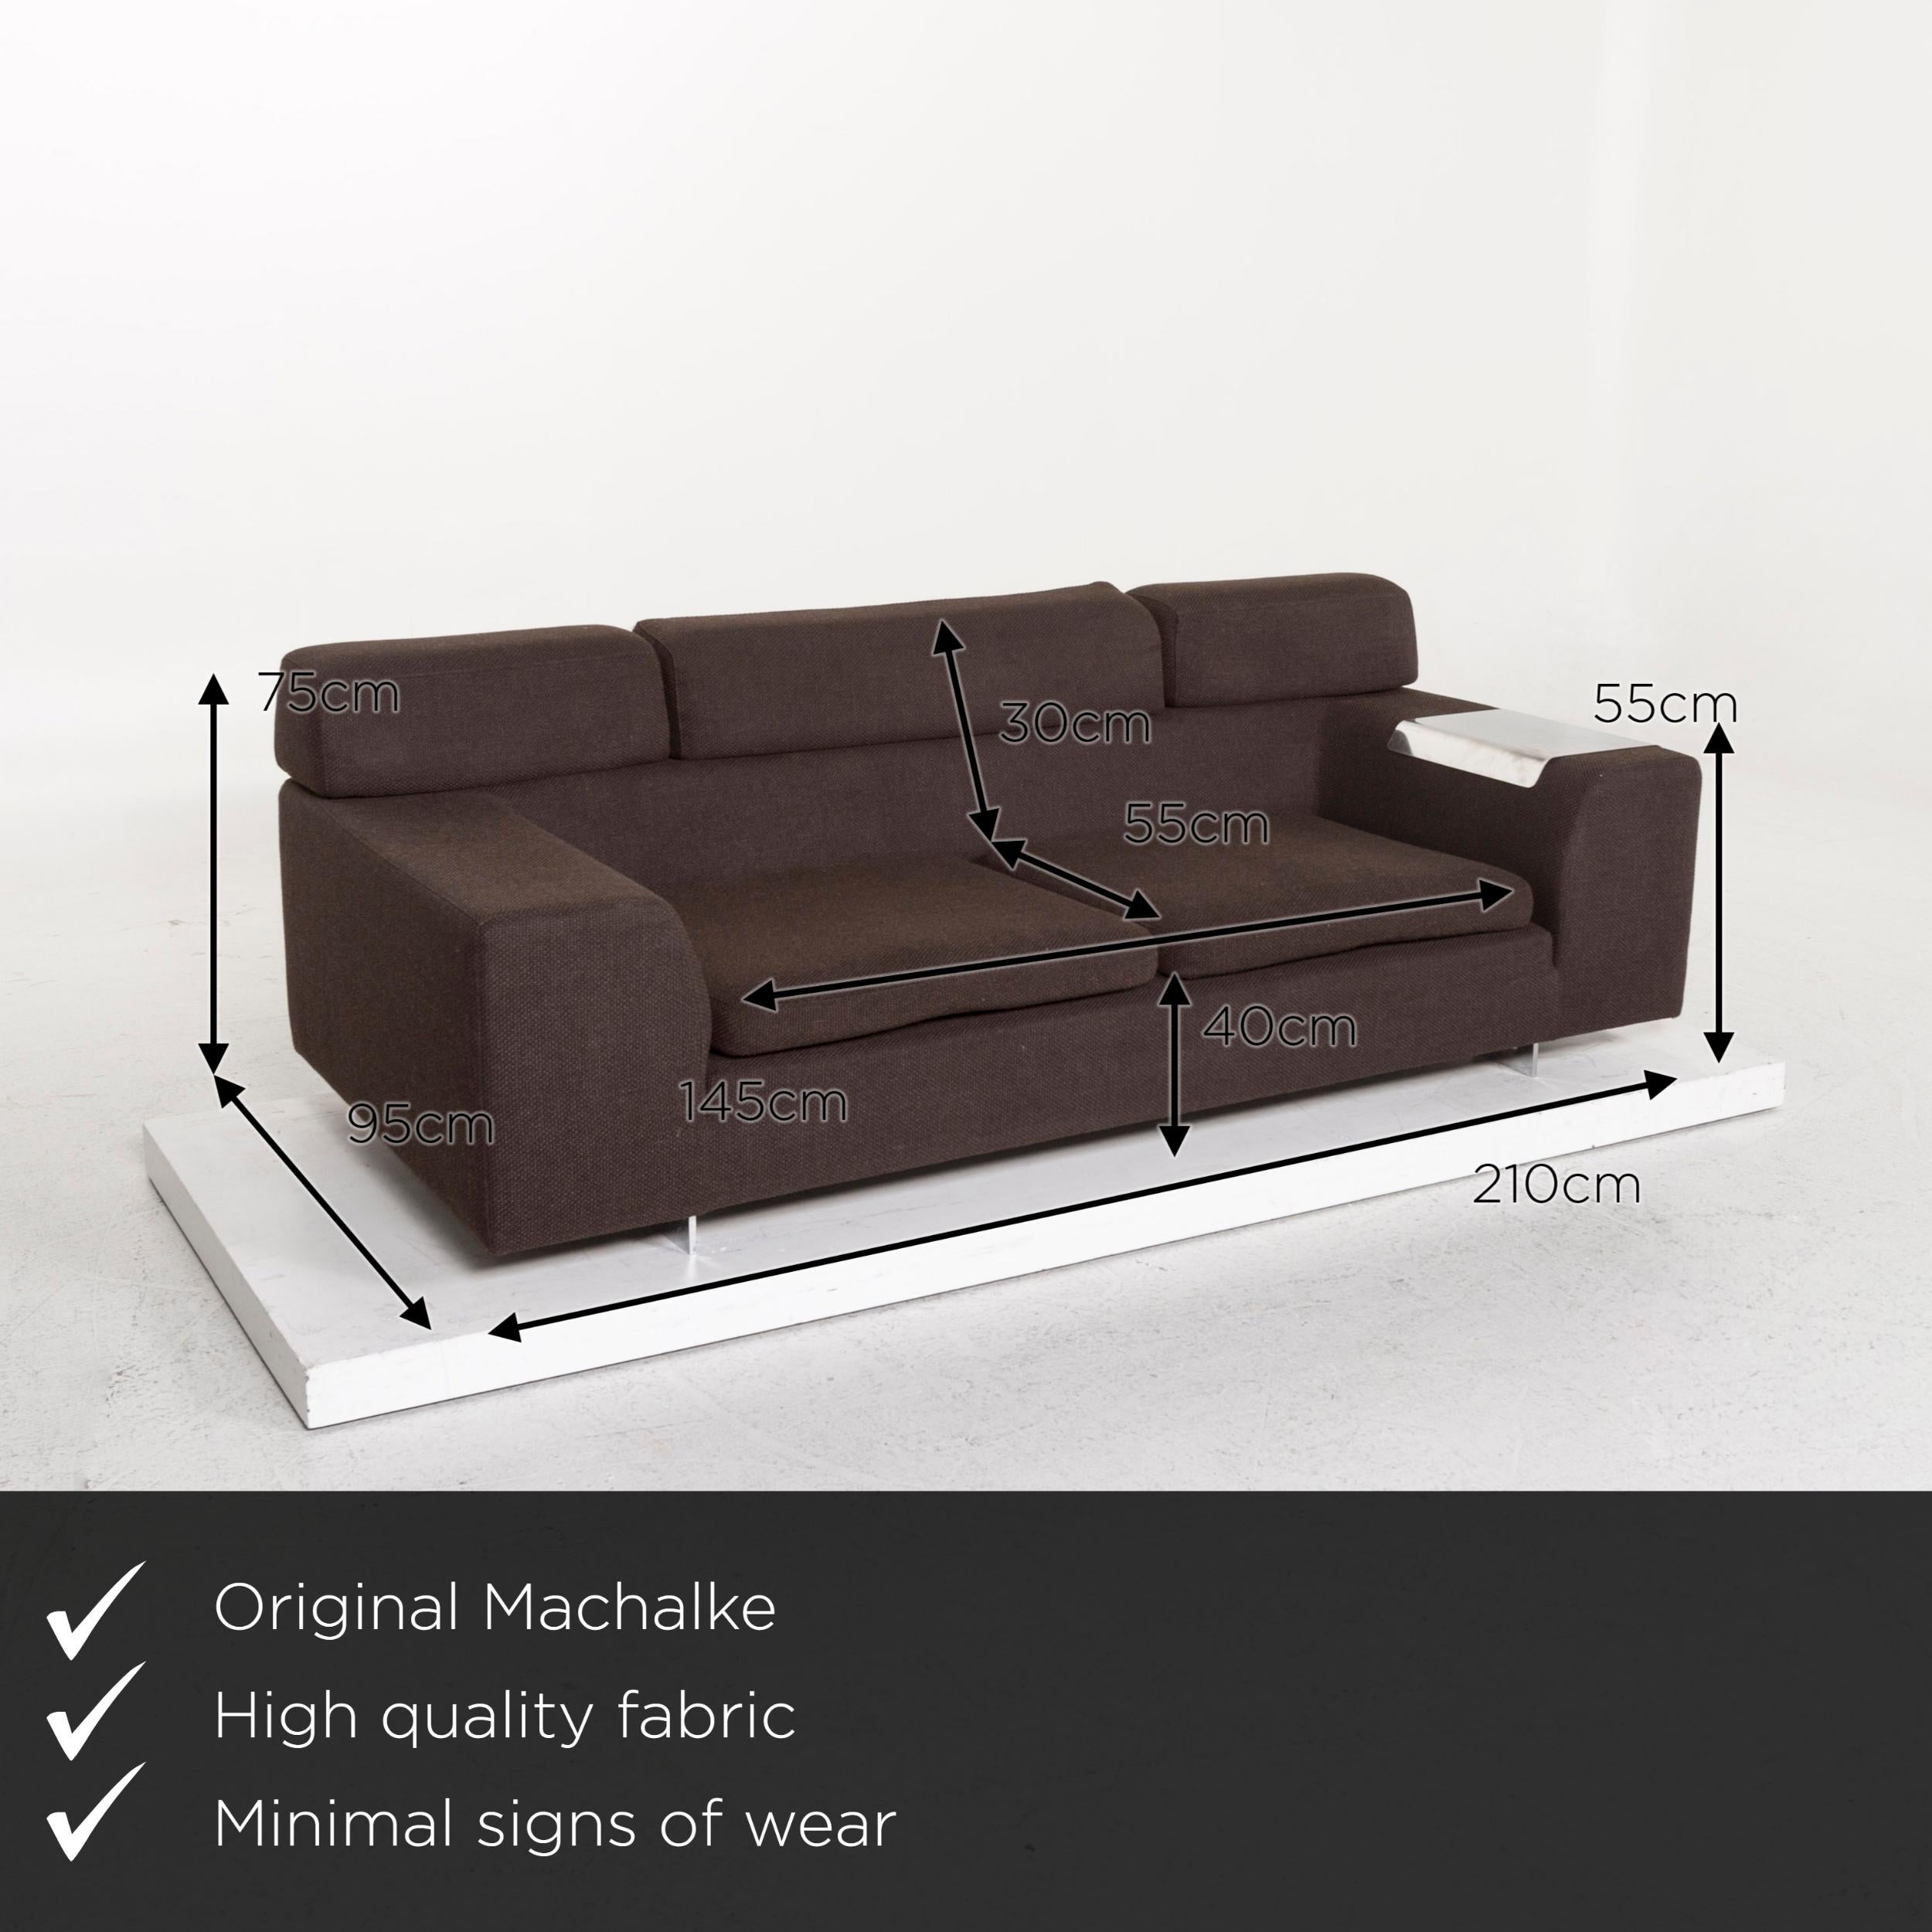 We present to you a Machalke black jack fabric sofa dark brown function couch.

 

 Product measurements in centimeters:
 

Depth 95
Width 210
Height 75
Seat height 40
Rest height 55
Seat depth 55
Seat width 145
Back height 30.